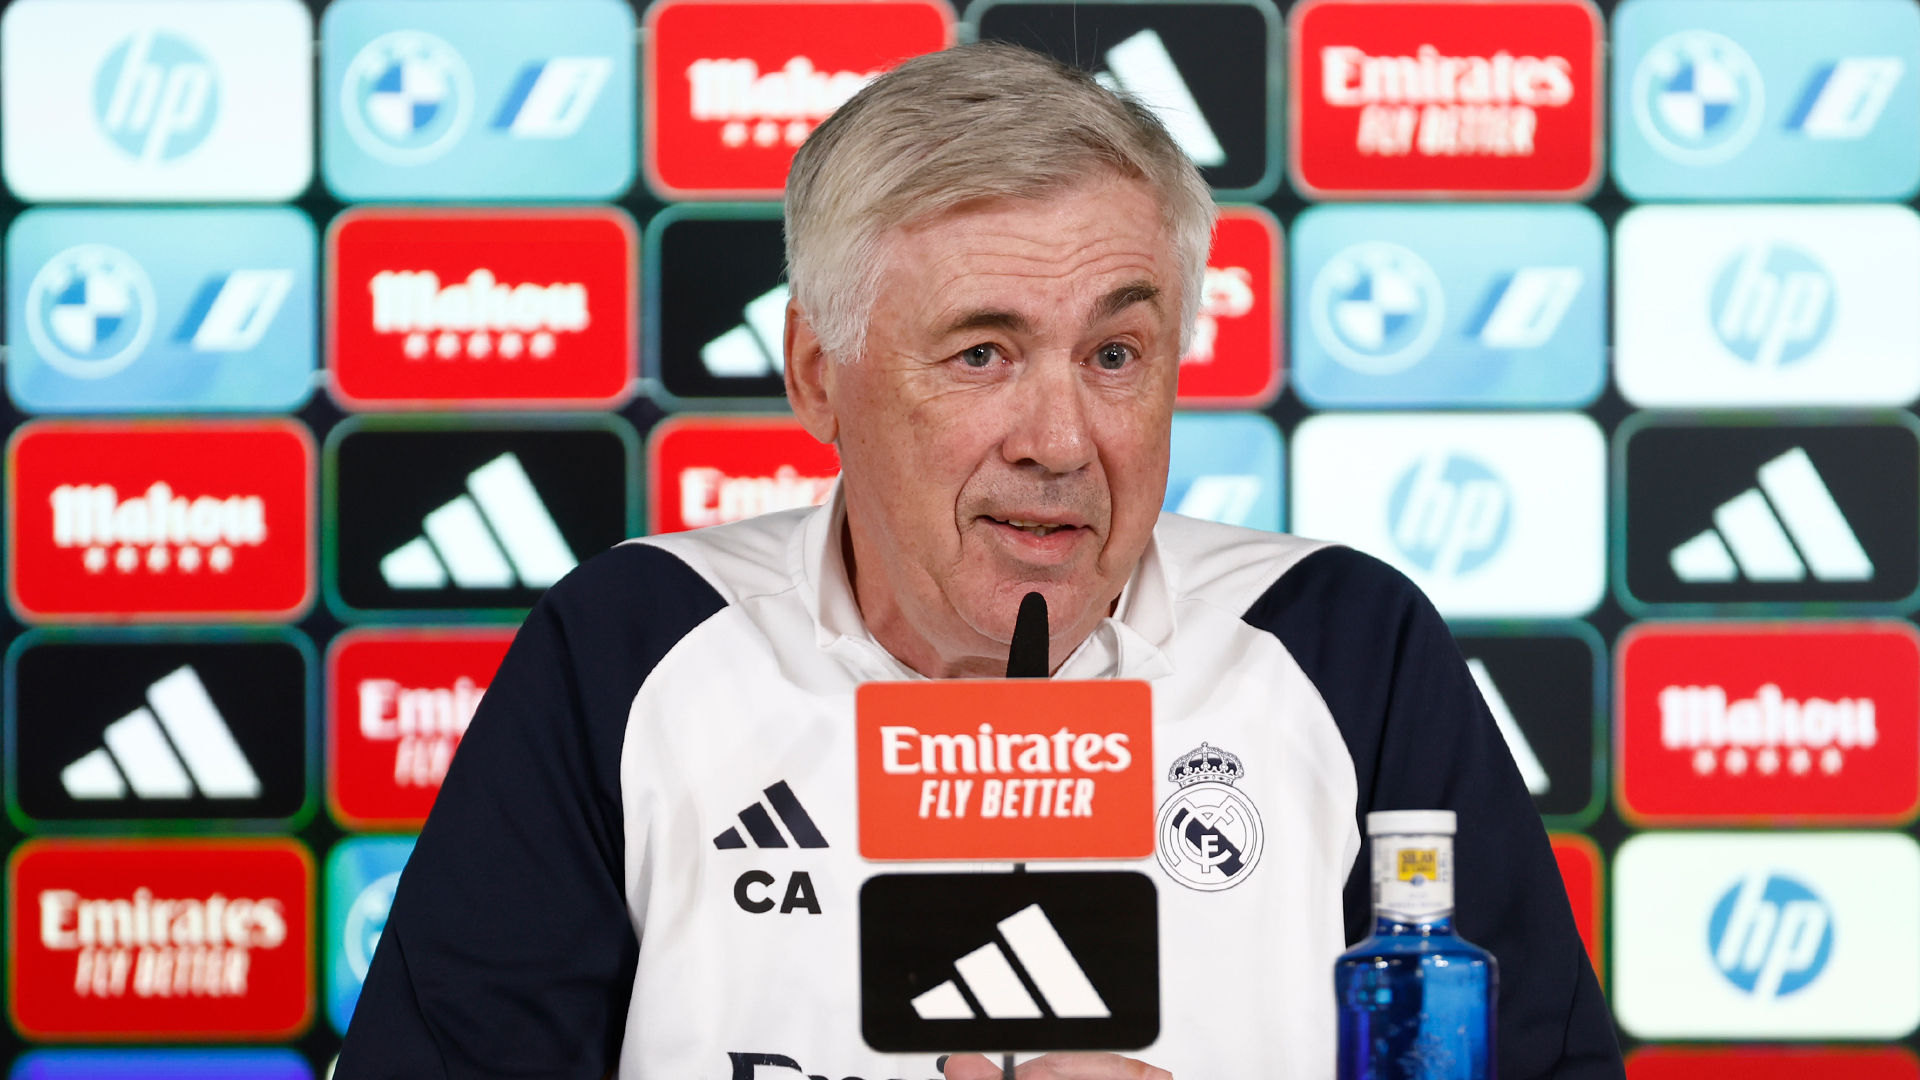 Ancelotti: "Our objective is to take three points and we're not thinking about what might happen next"